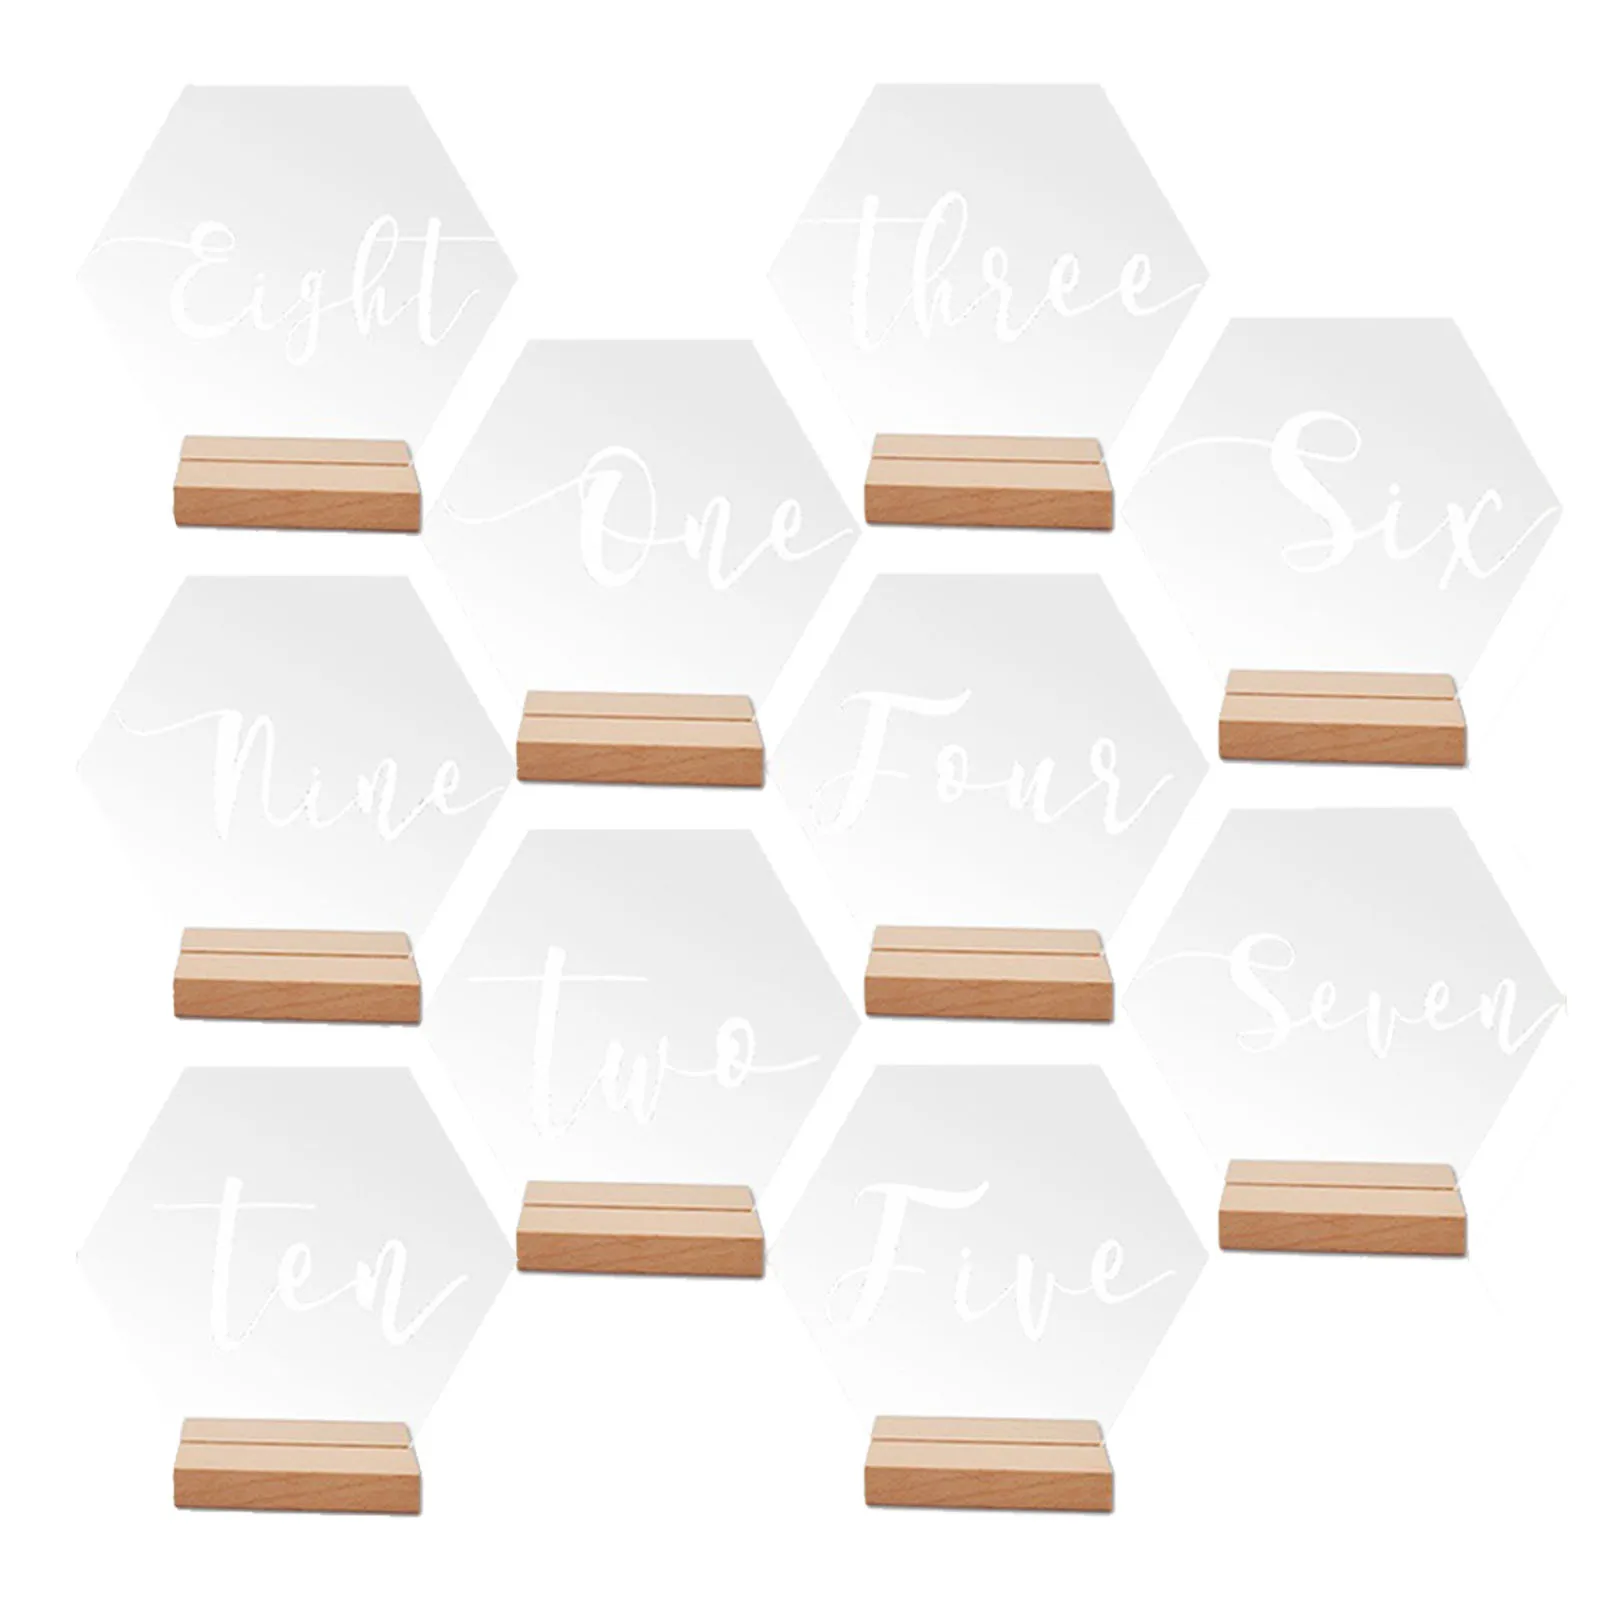 

Acrylic Wedding Table Numbers With Wood Base 10pcs Hexagon Wedding Numbers For Tables Table Cards For Weddings Events Parties